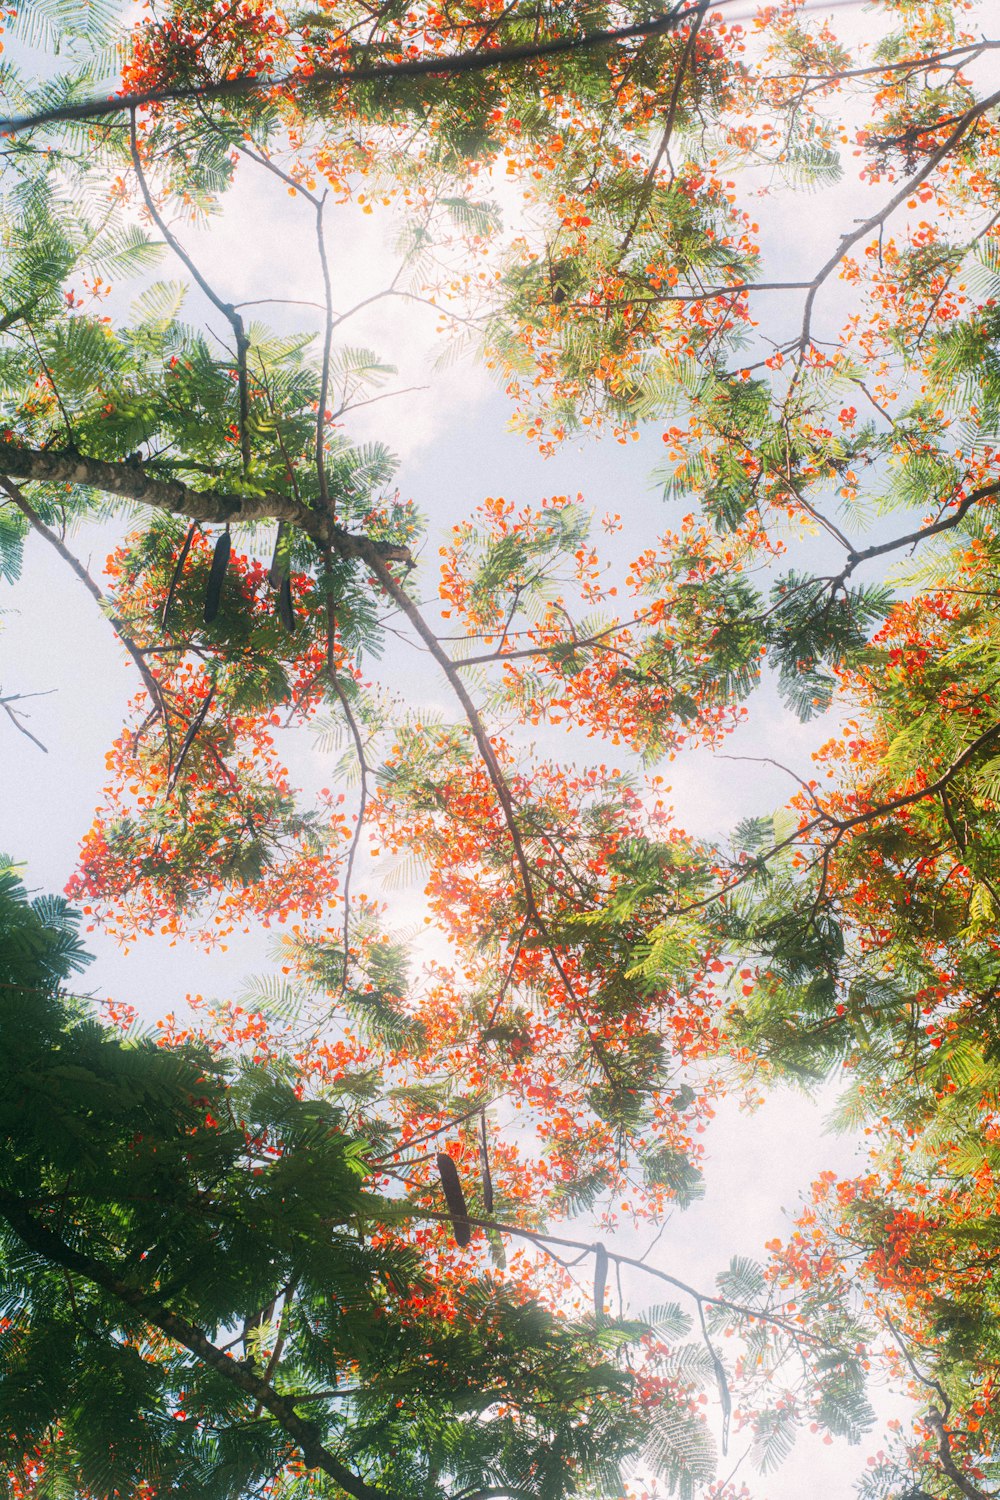 looking up at the canopy of a tree with orange flowers